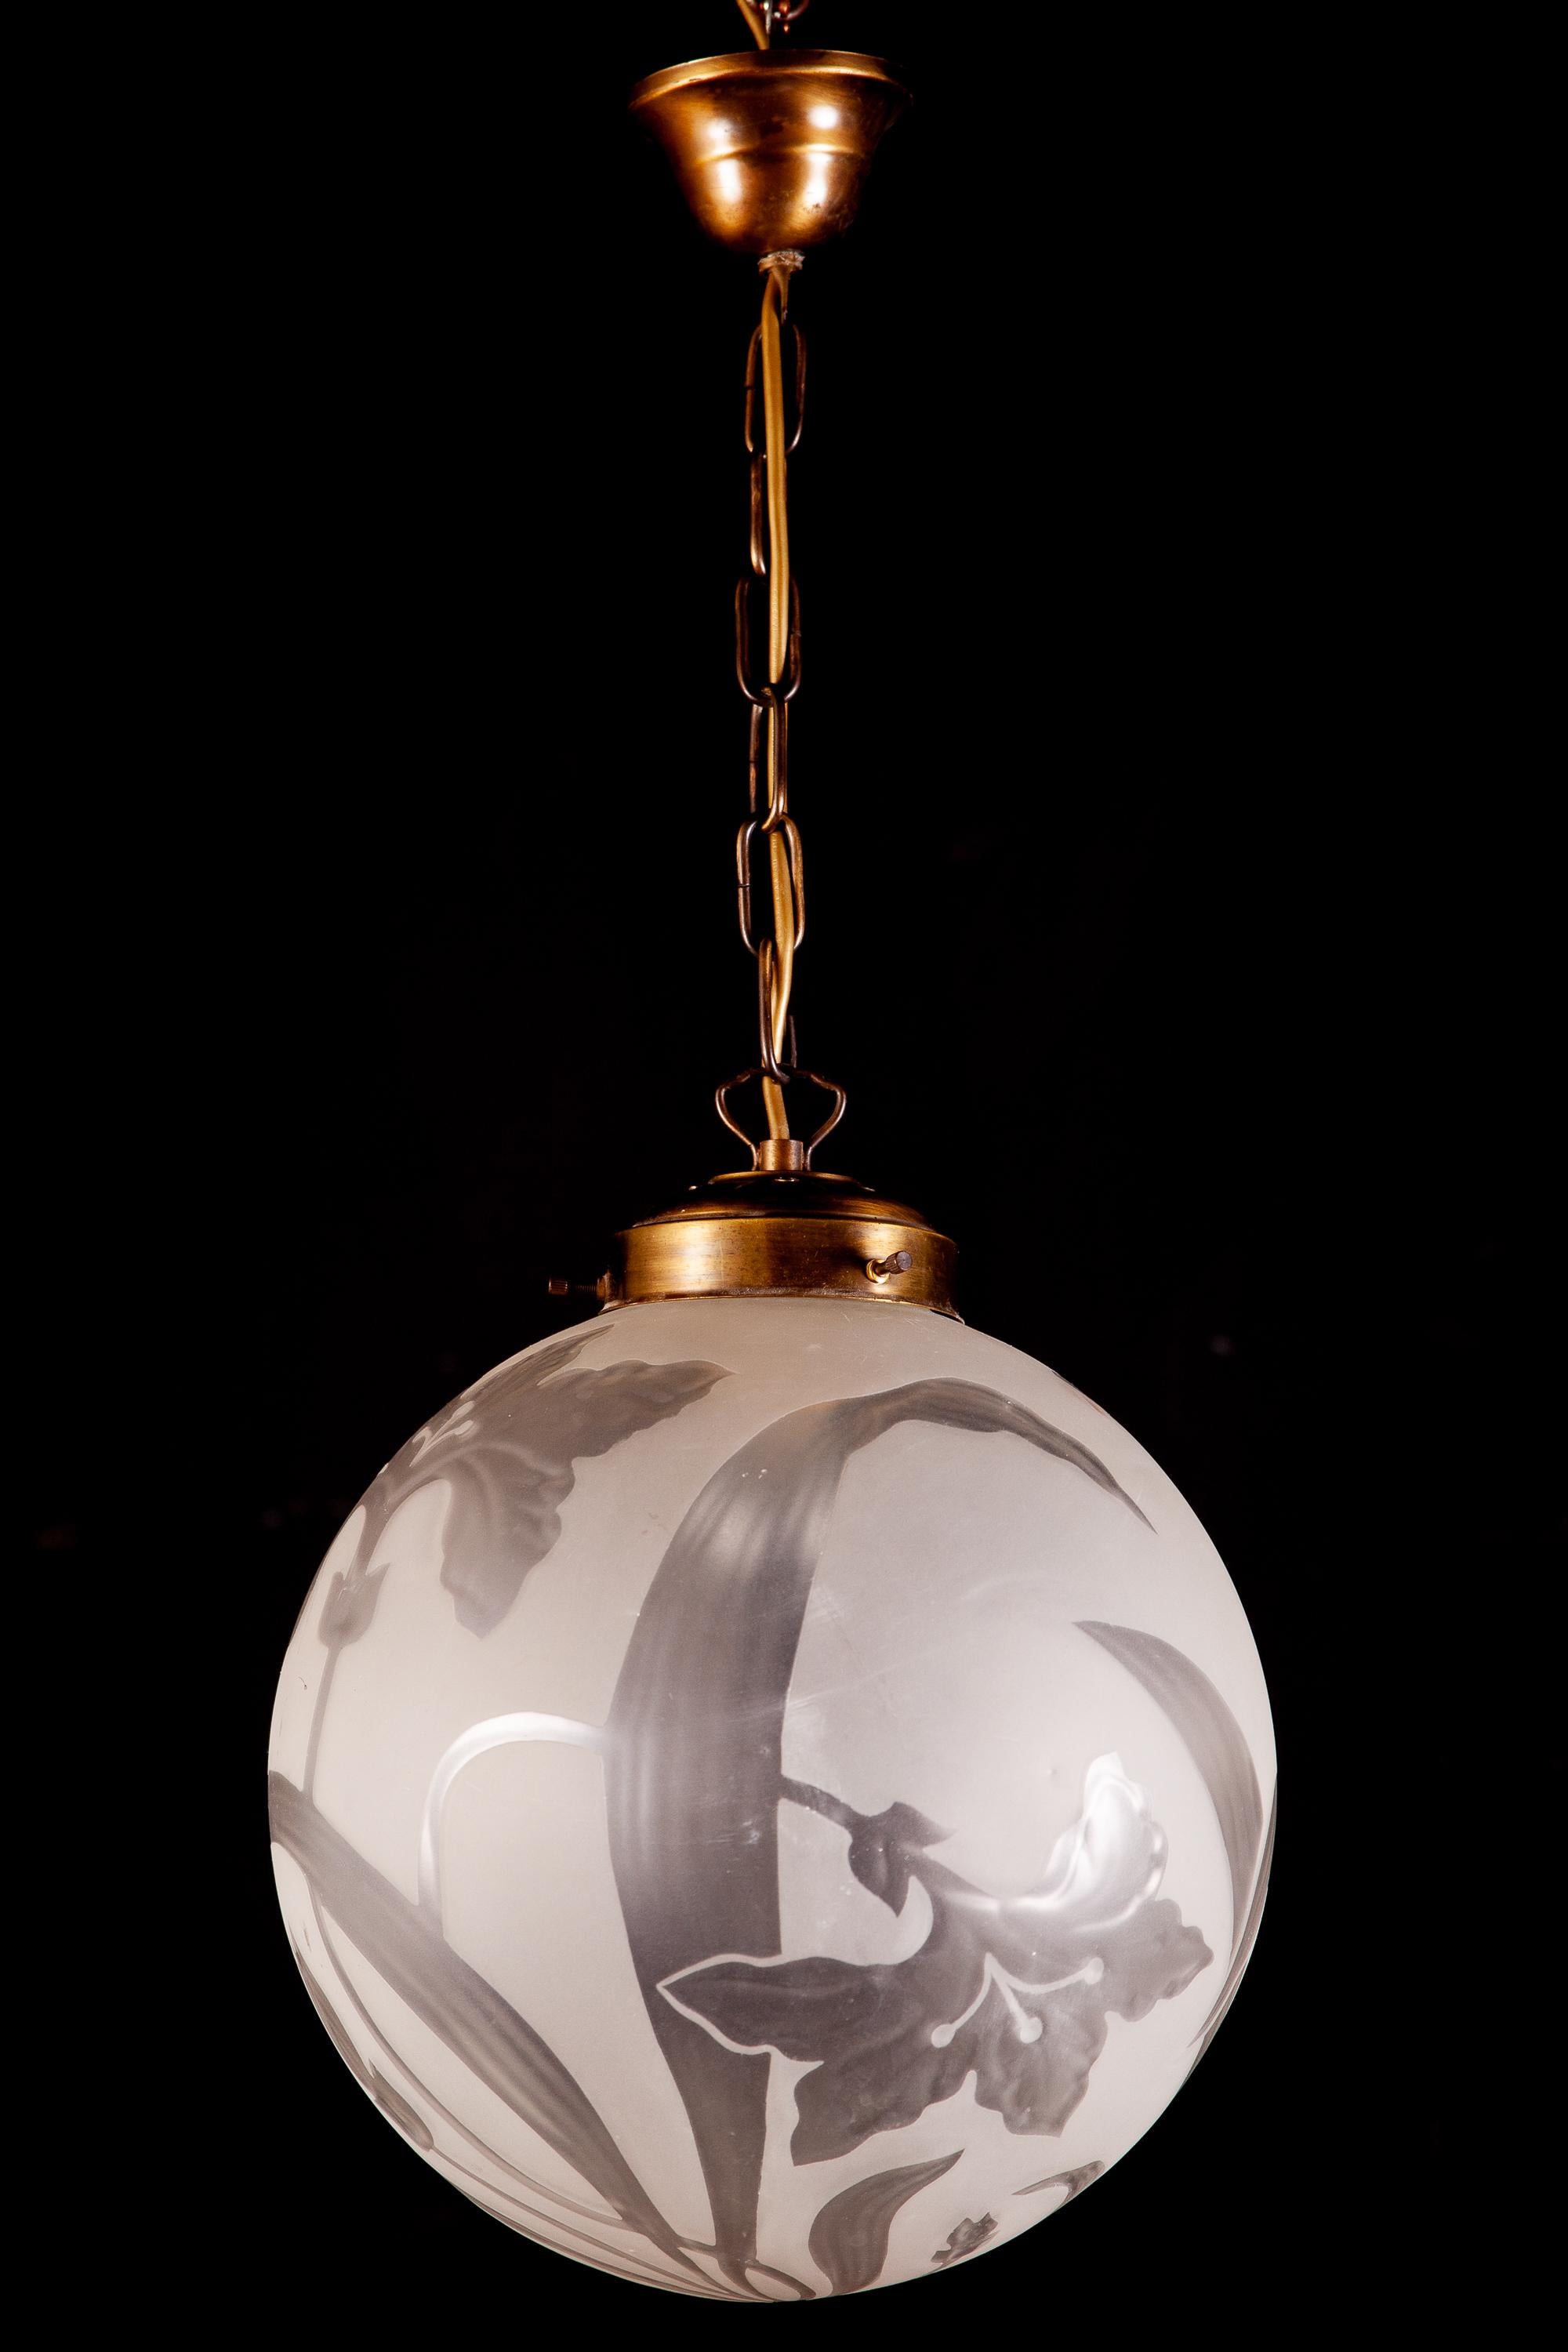 Four Liberty Engraved Glass Sphere Chandeliers or Lanterns, Italy, 1940 For Sale 4